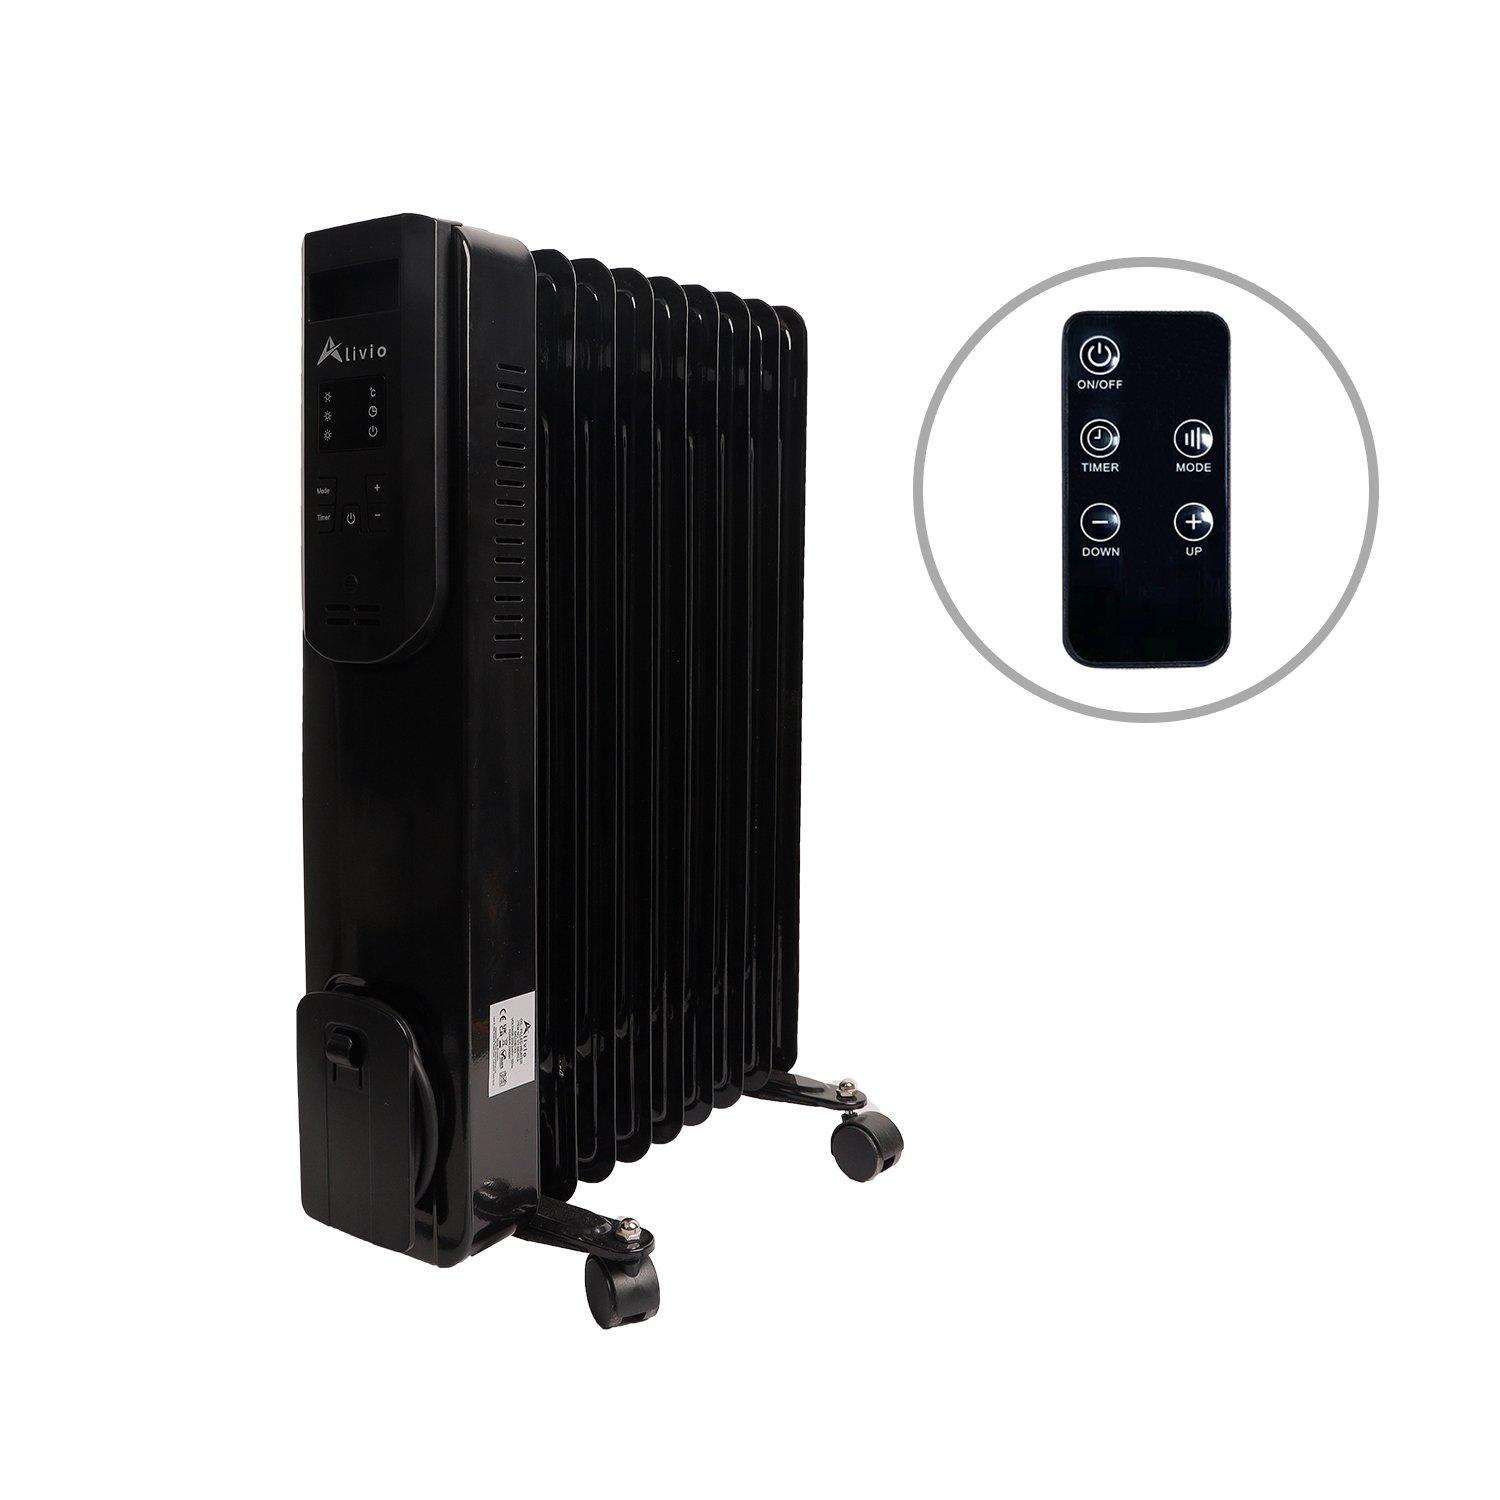 2000W Oil Filled Radiator 9 Fin Portable Heater With Timer Remote Control